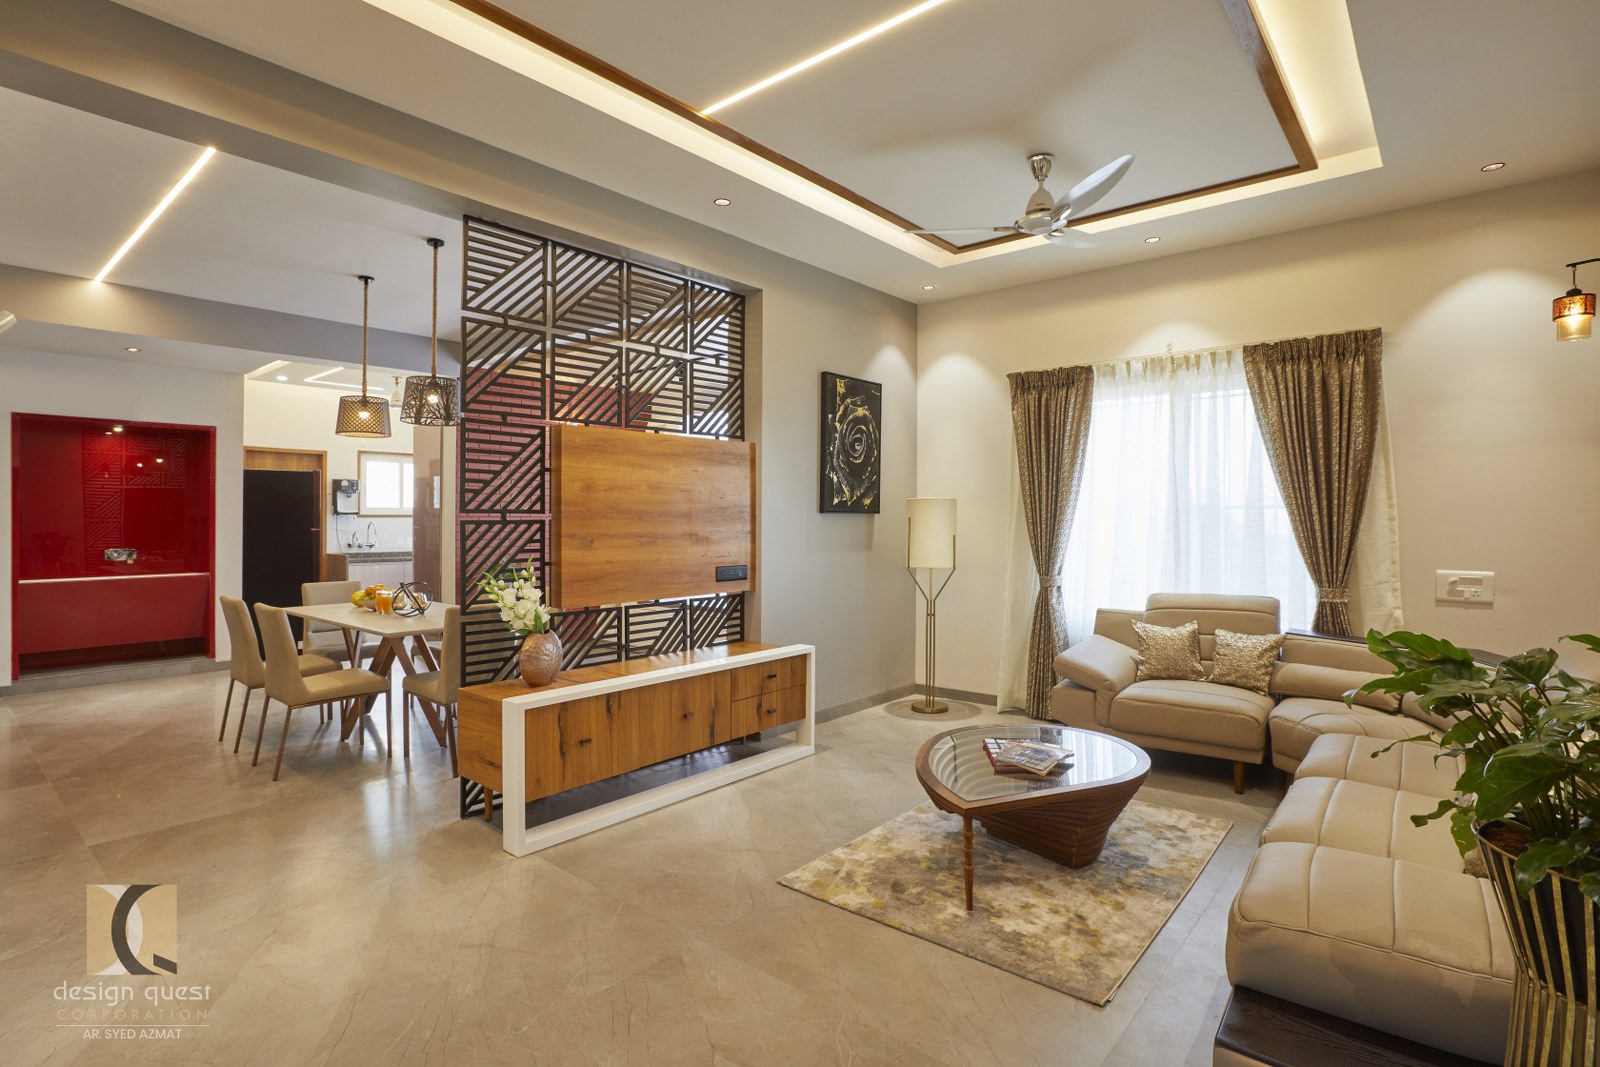 Bungalow Interior With Simple Material And Colour Palette | Design ...